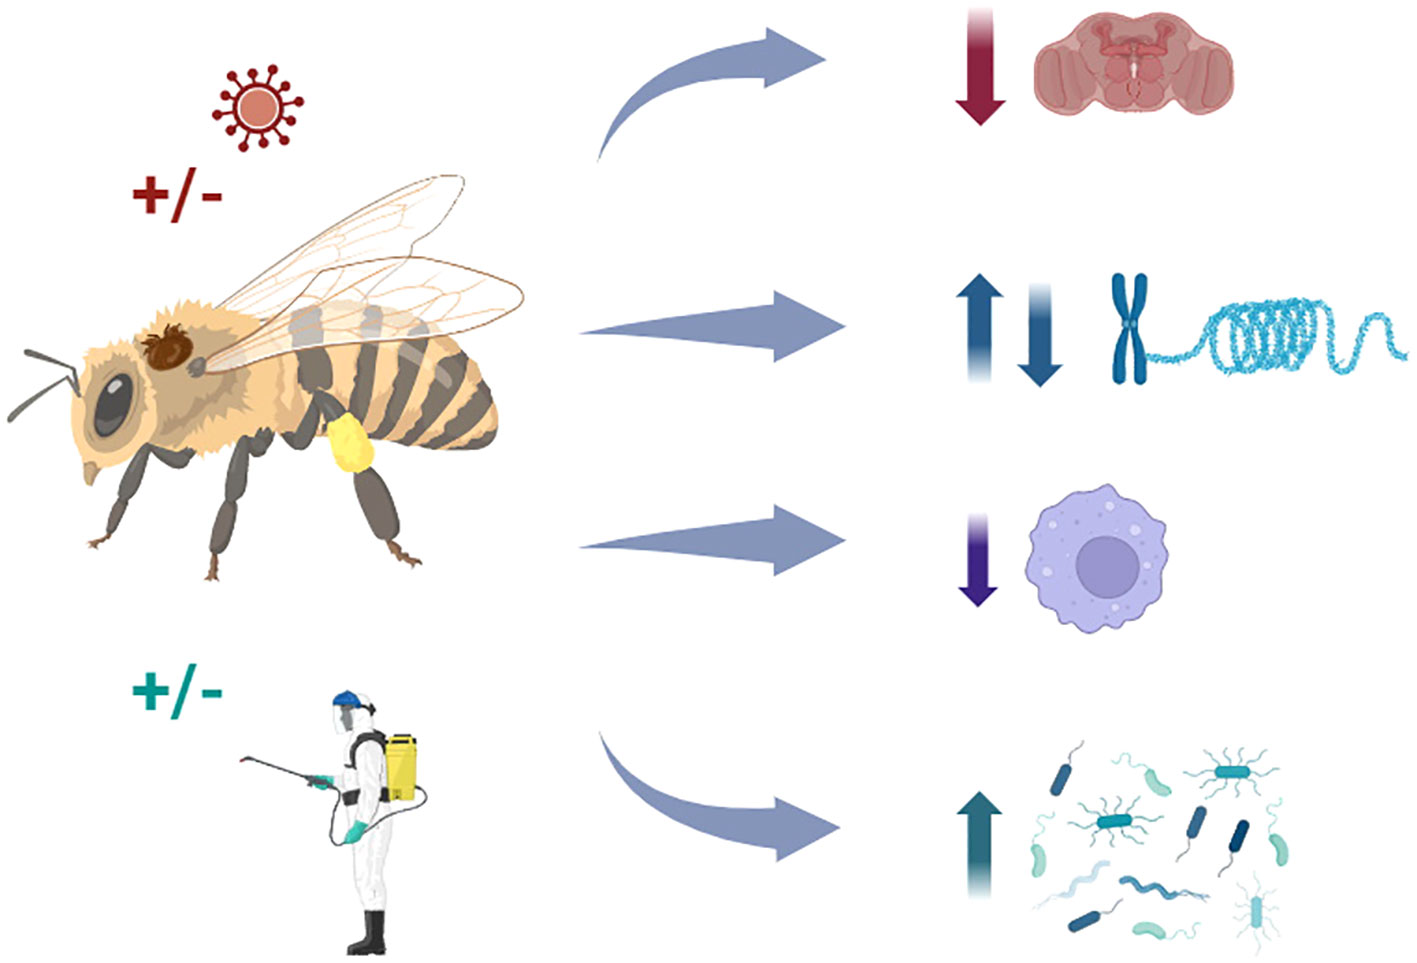 Bee Facts, Types, Diet, Reproduction, Classification, Pictures